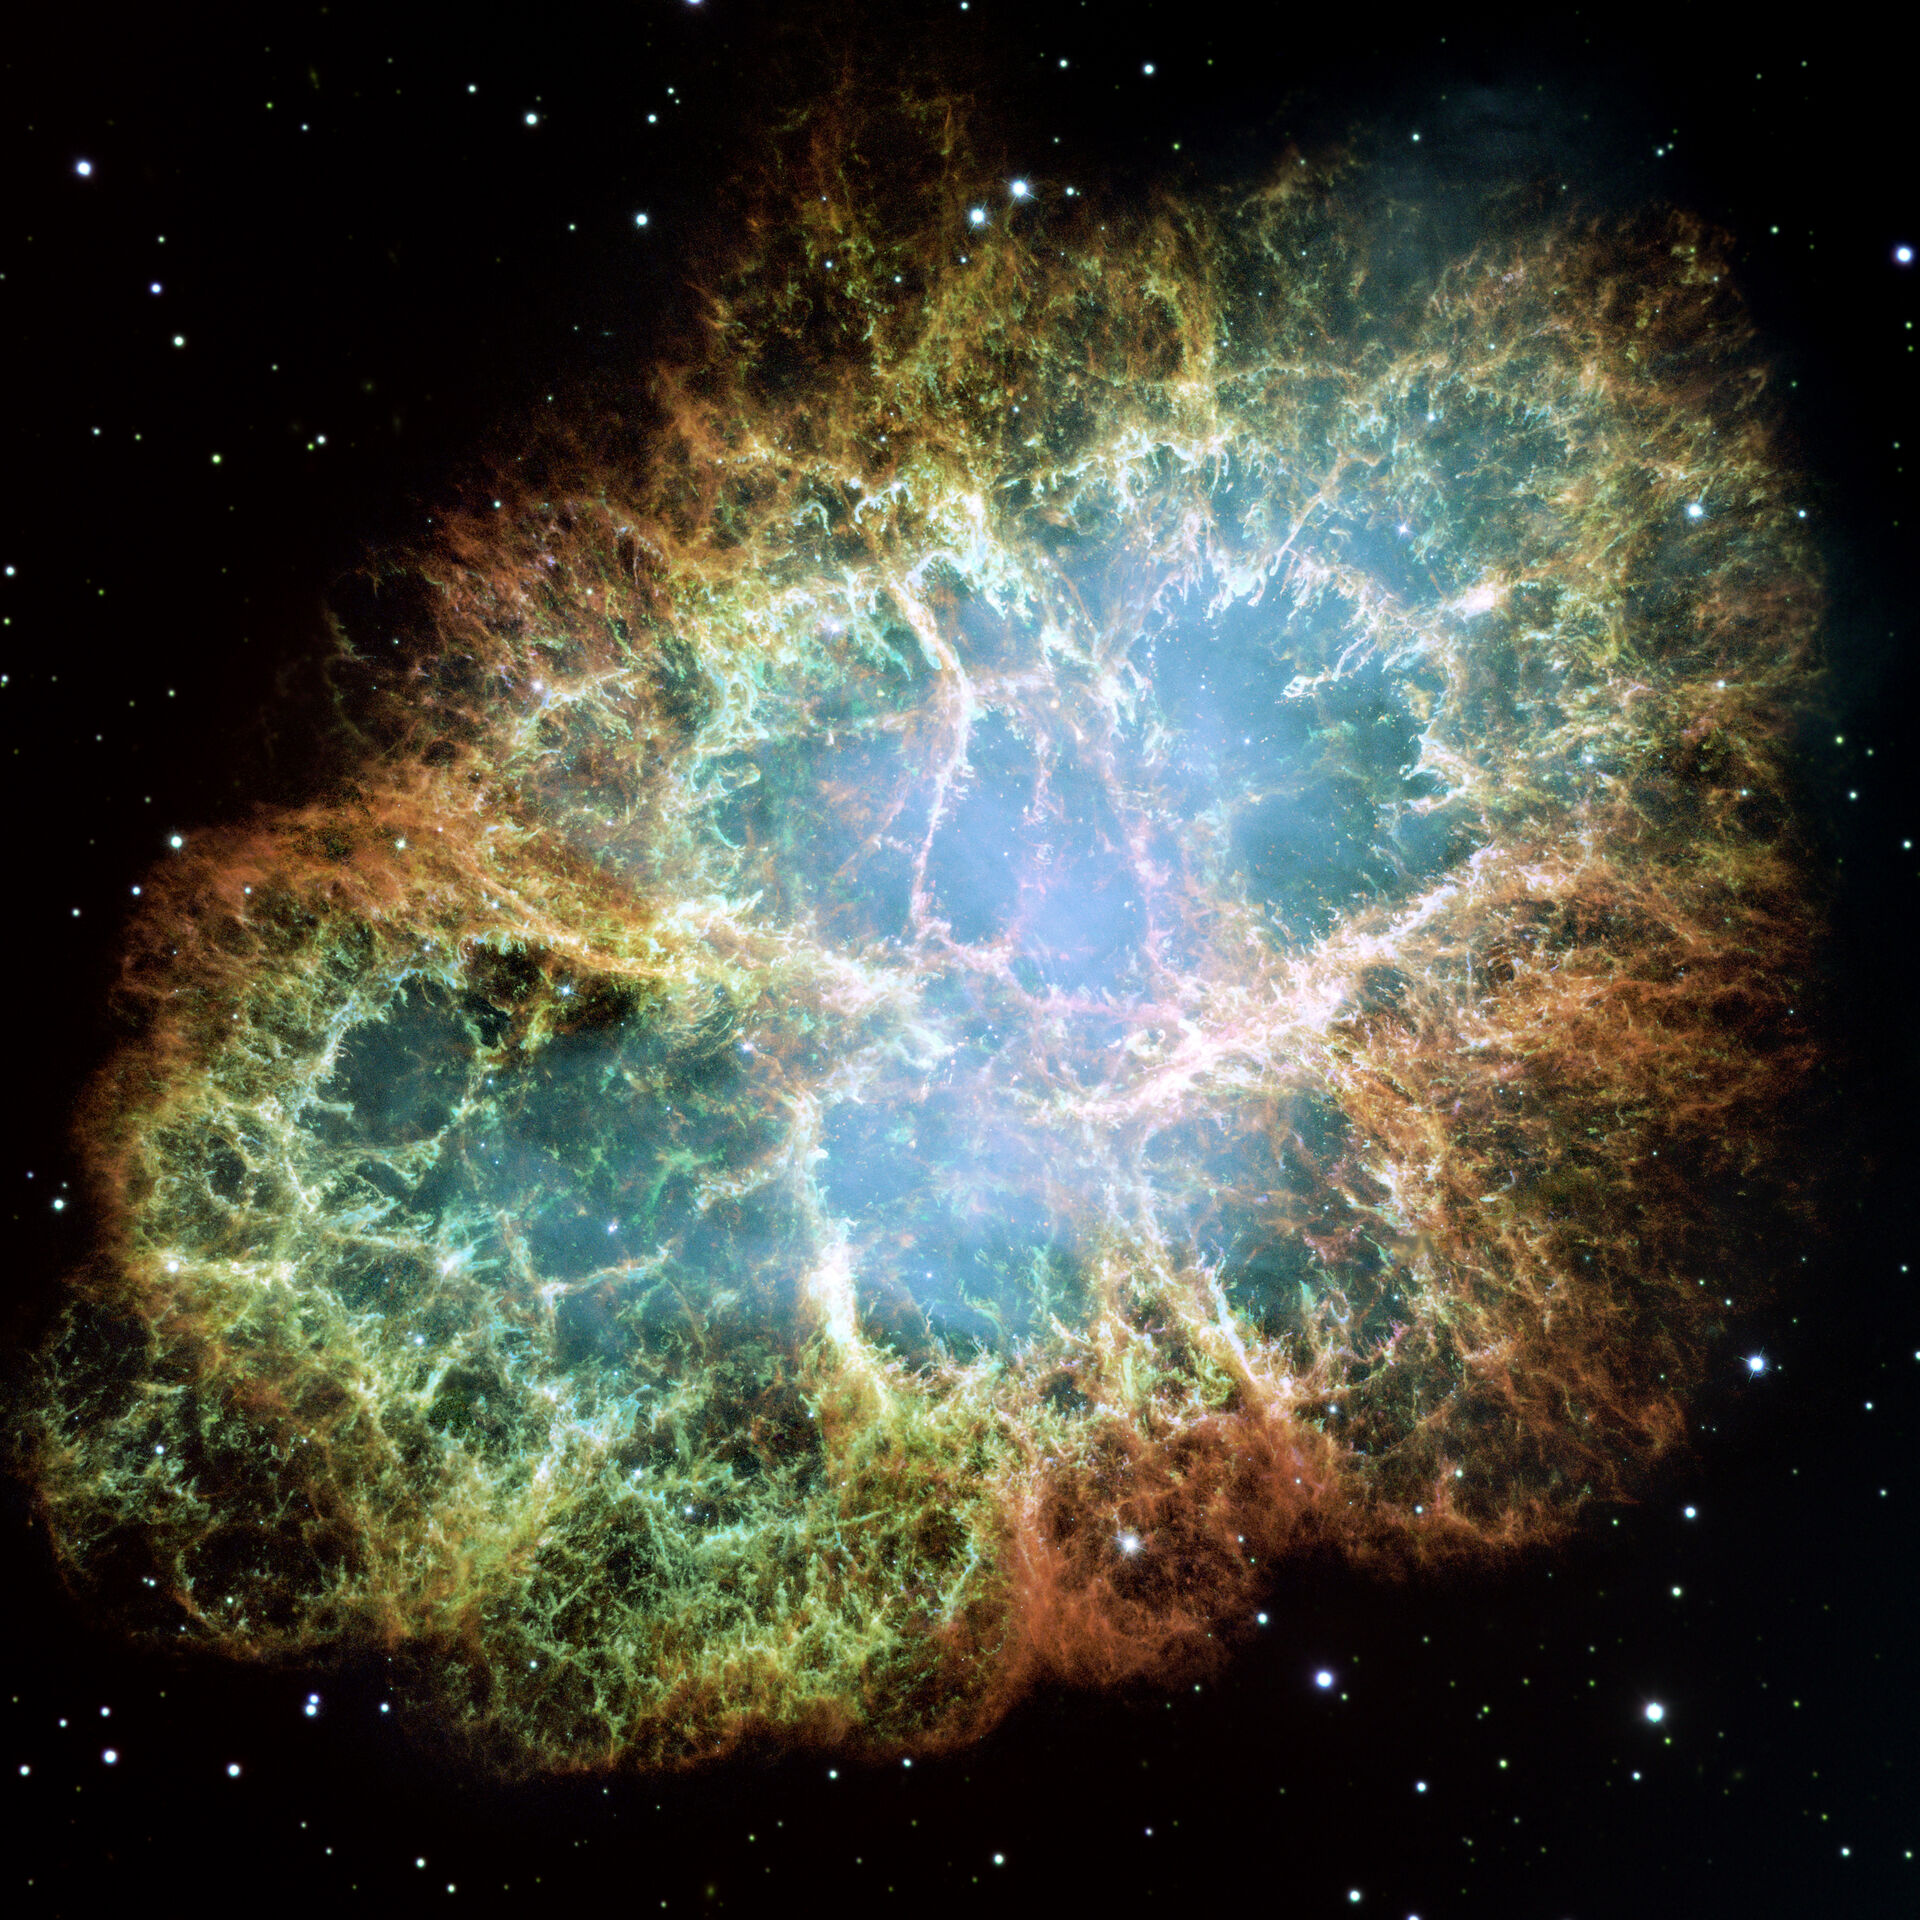 Image of the remnants of a supernova explosion